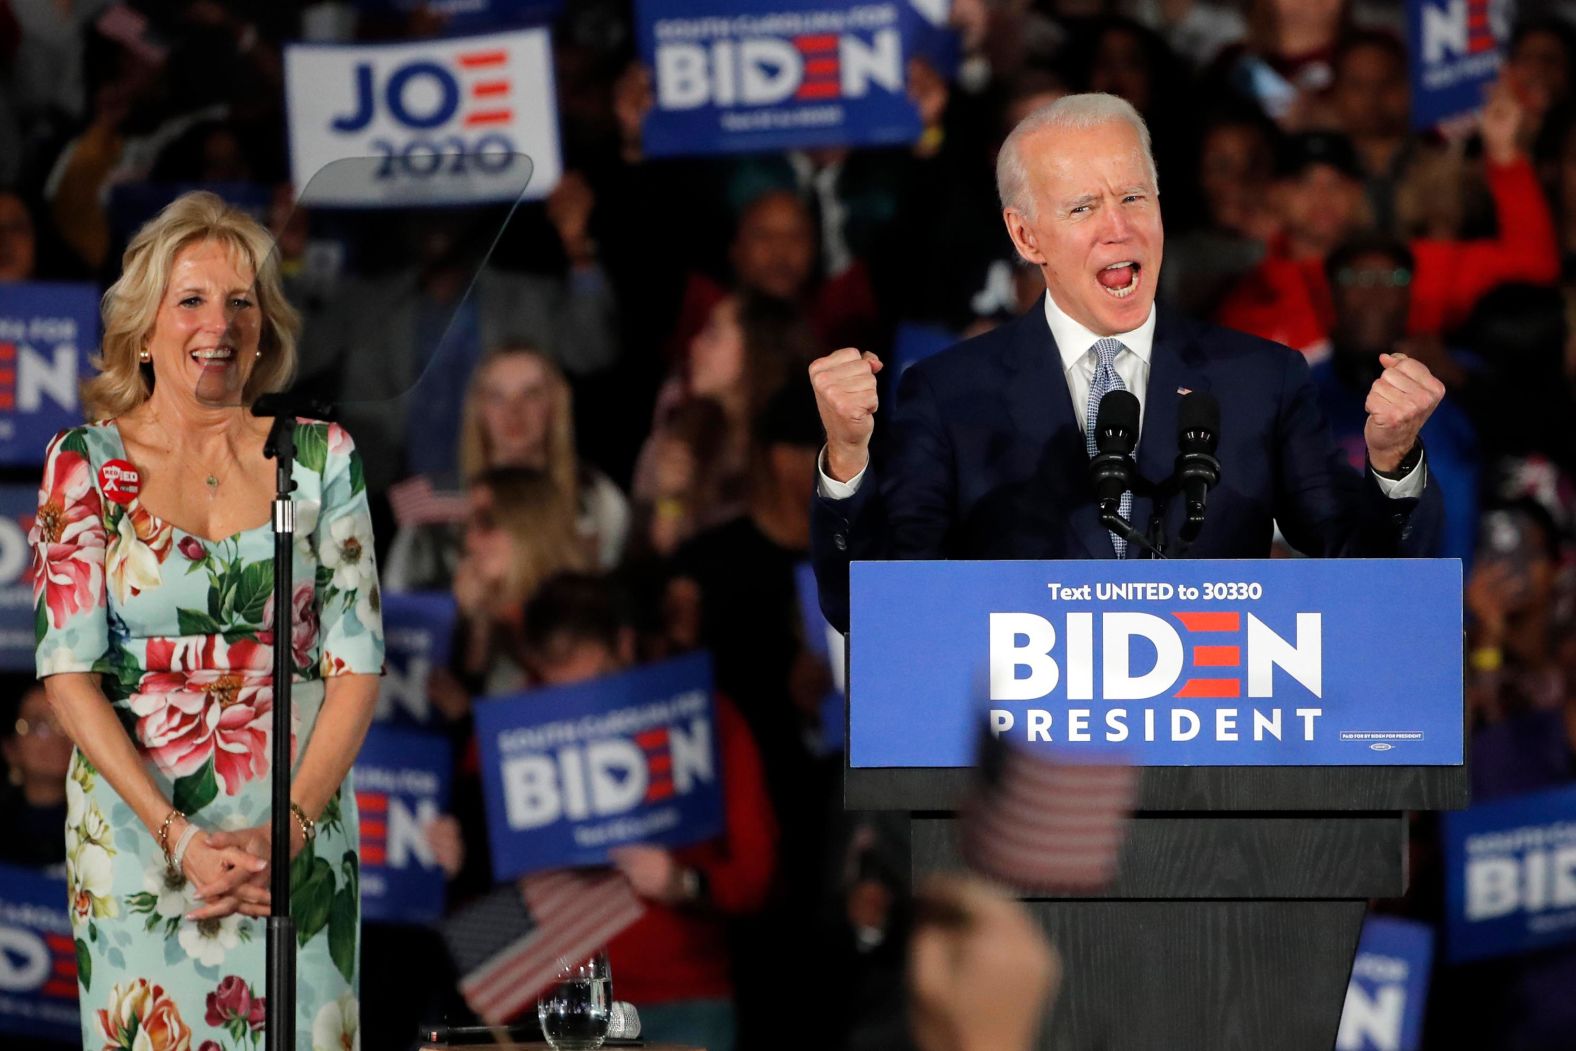 Biden rallied from early setbacks in Iowa, New Hampshire and Nevada, <a href="index.php?page=&url=http%3A%2F%2Fwww.cnn.com%2F2020%2F02%2F29%2Fpolitics%2Fgallery%2Fsouth-carolina-primary%2Findex.html" target="_blank">winning the South Carolina primary</a> in February 2020. "Just days ago, the press and pundits had declared this candidacy dead," Biden said in his speech to supporters. "Because of you, the heart of the Democratic Party, we just won and we won big because of you. We are very much alive."